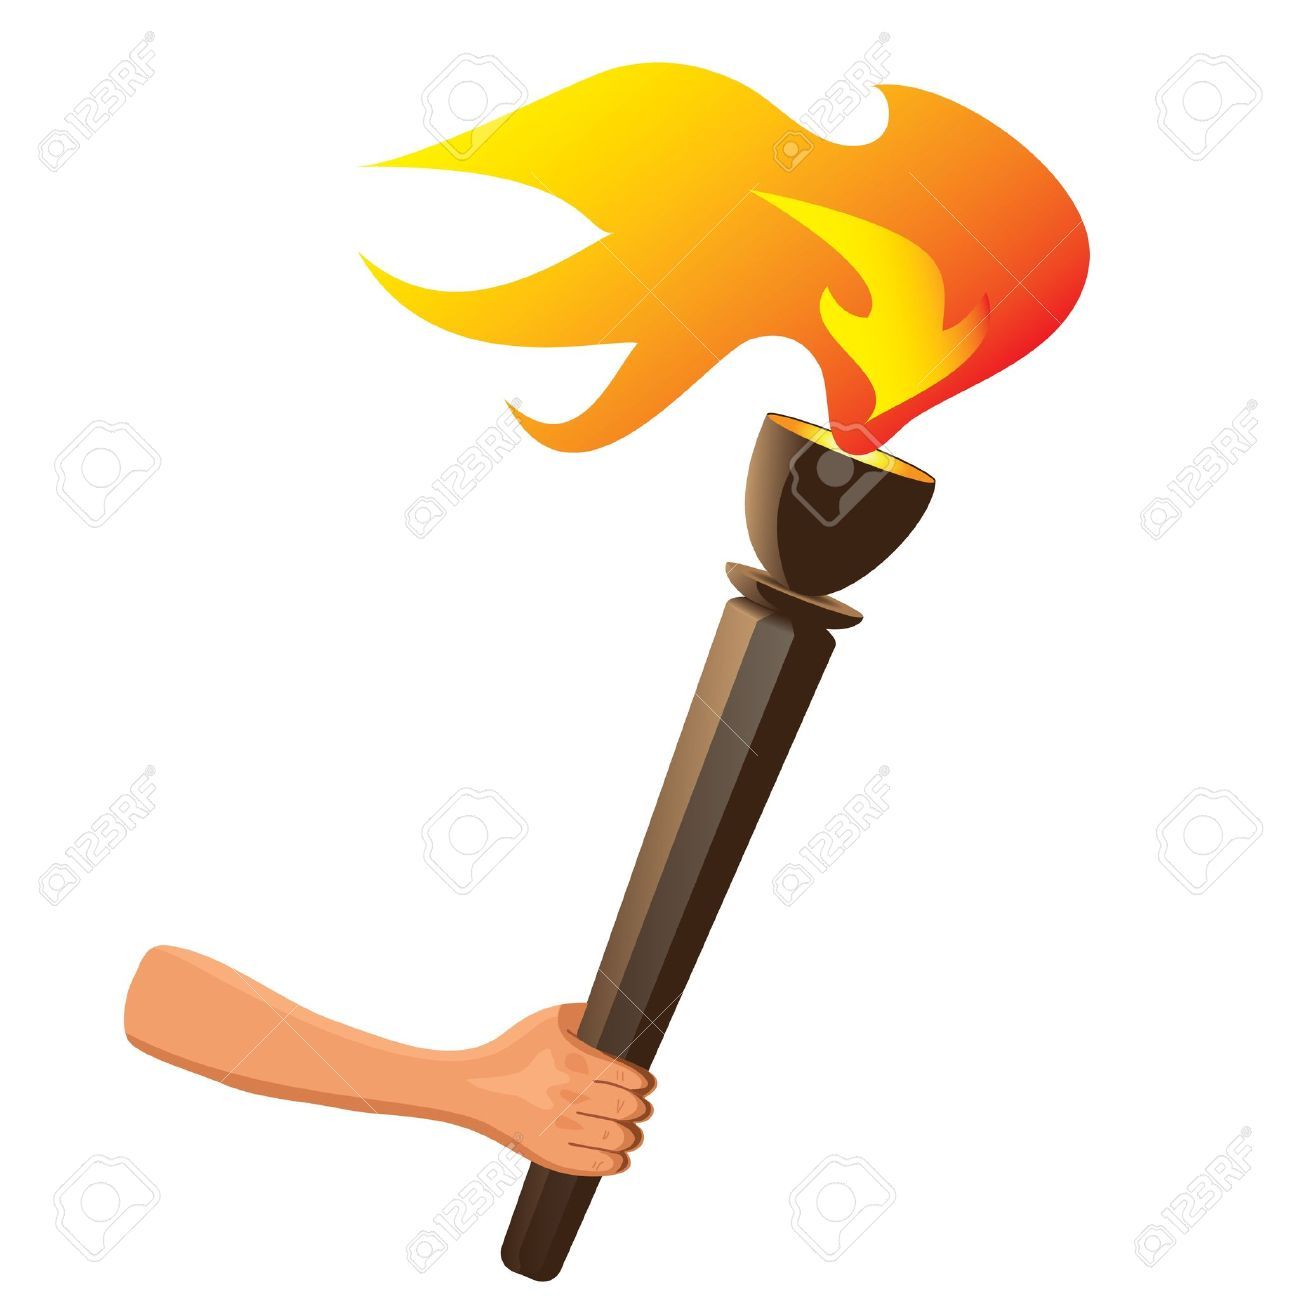 Sports torch clipart